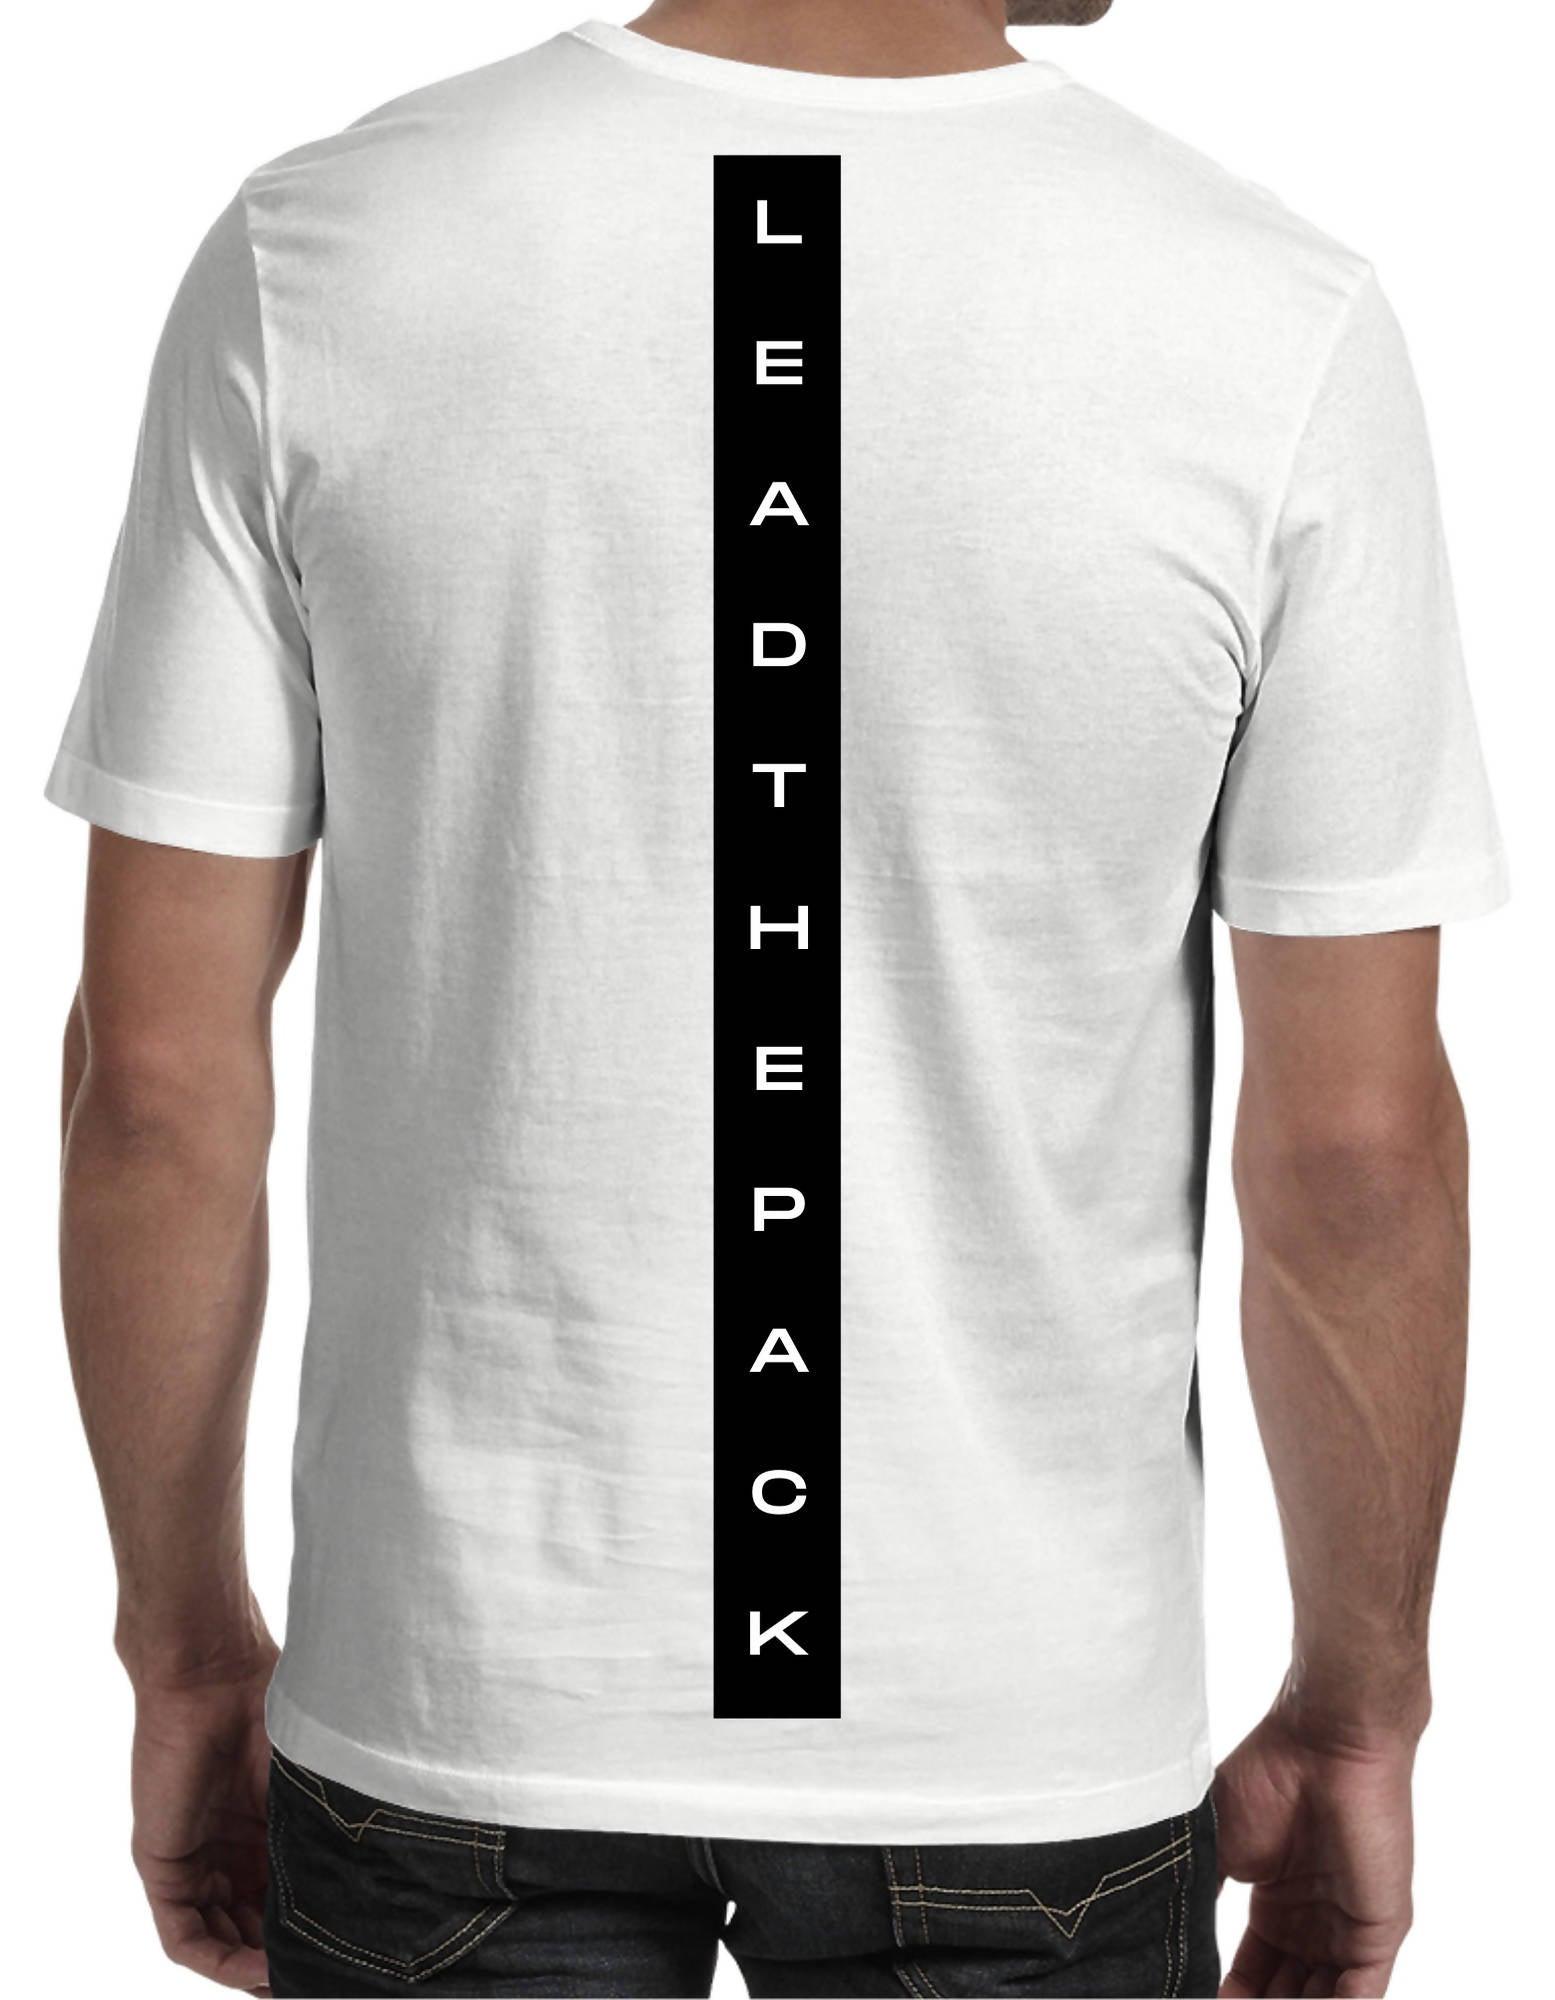 LTP White Shirt - A3 Back with Logo (small A4) on left chest front -Men's T-Shirt (Huzki Apparel)